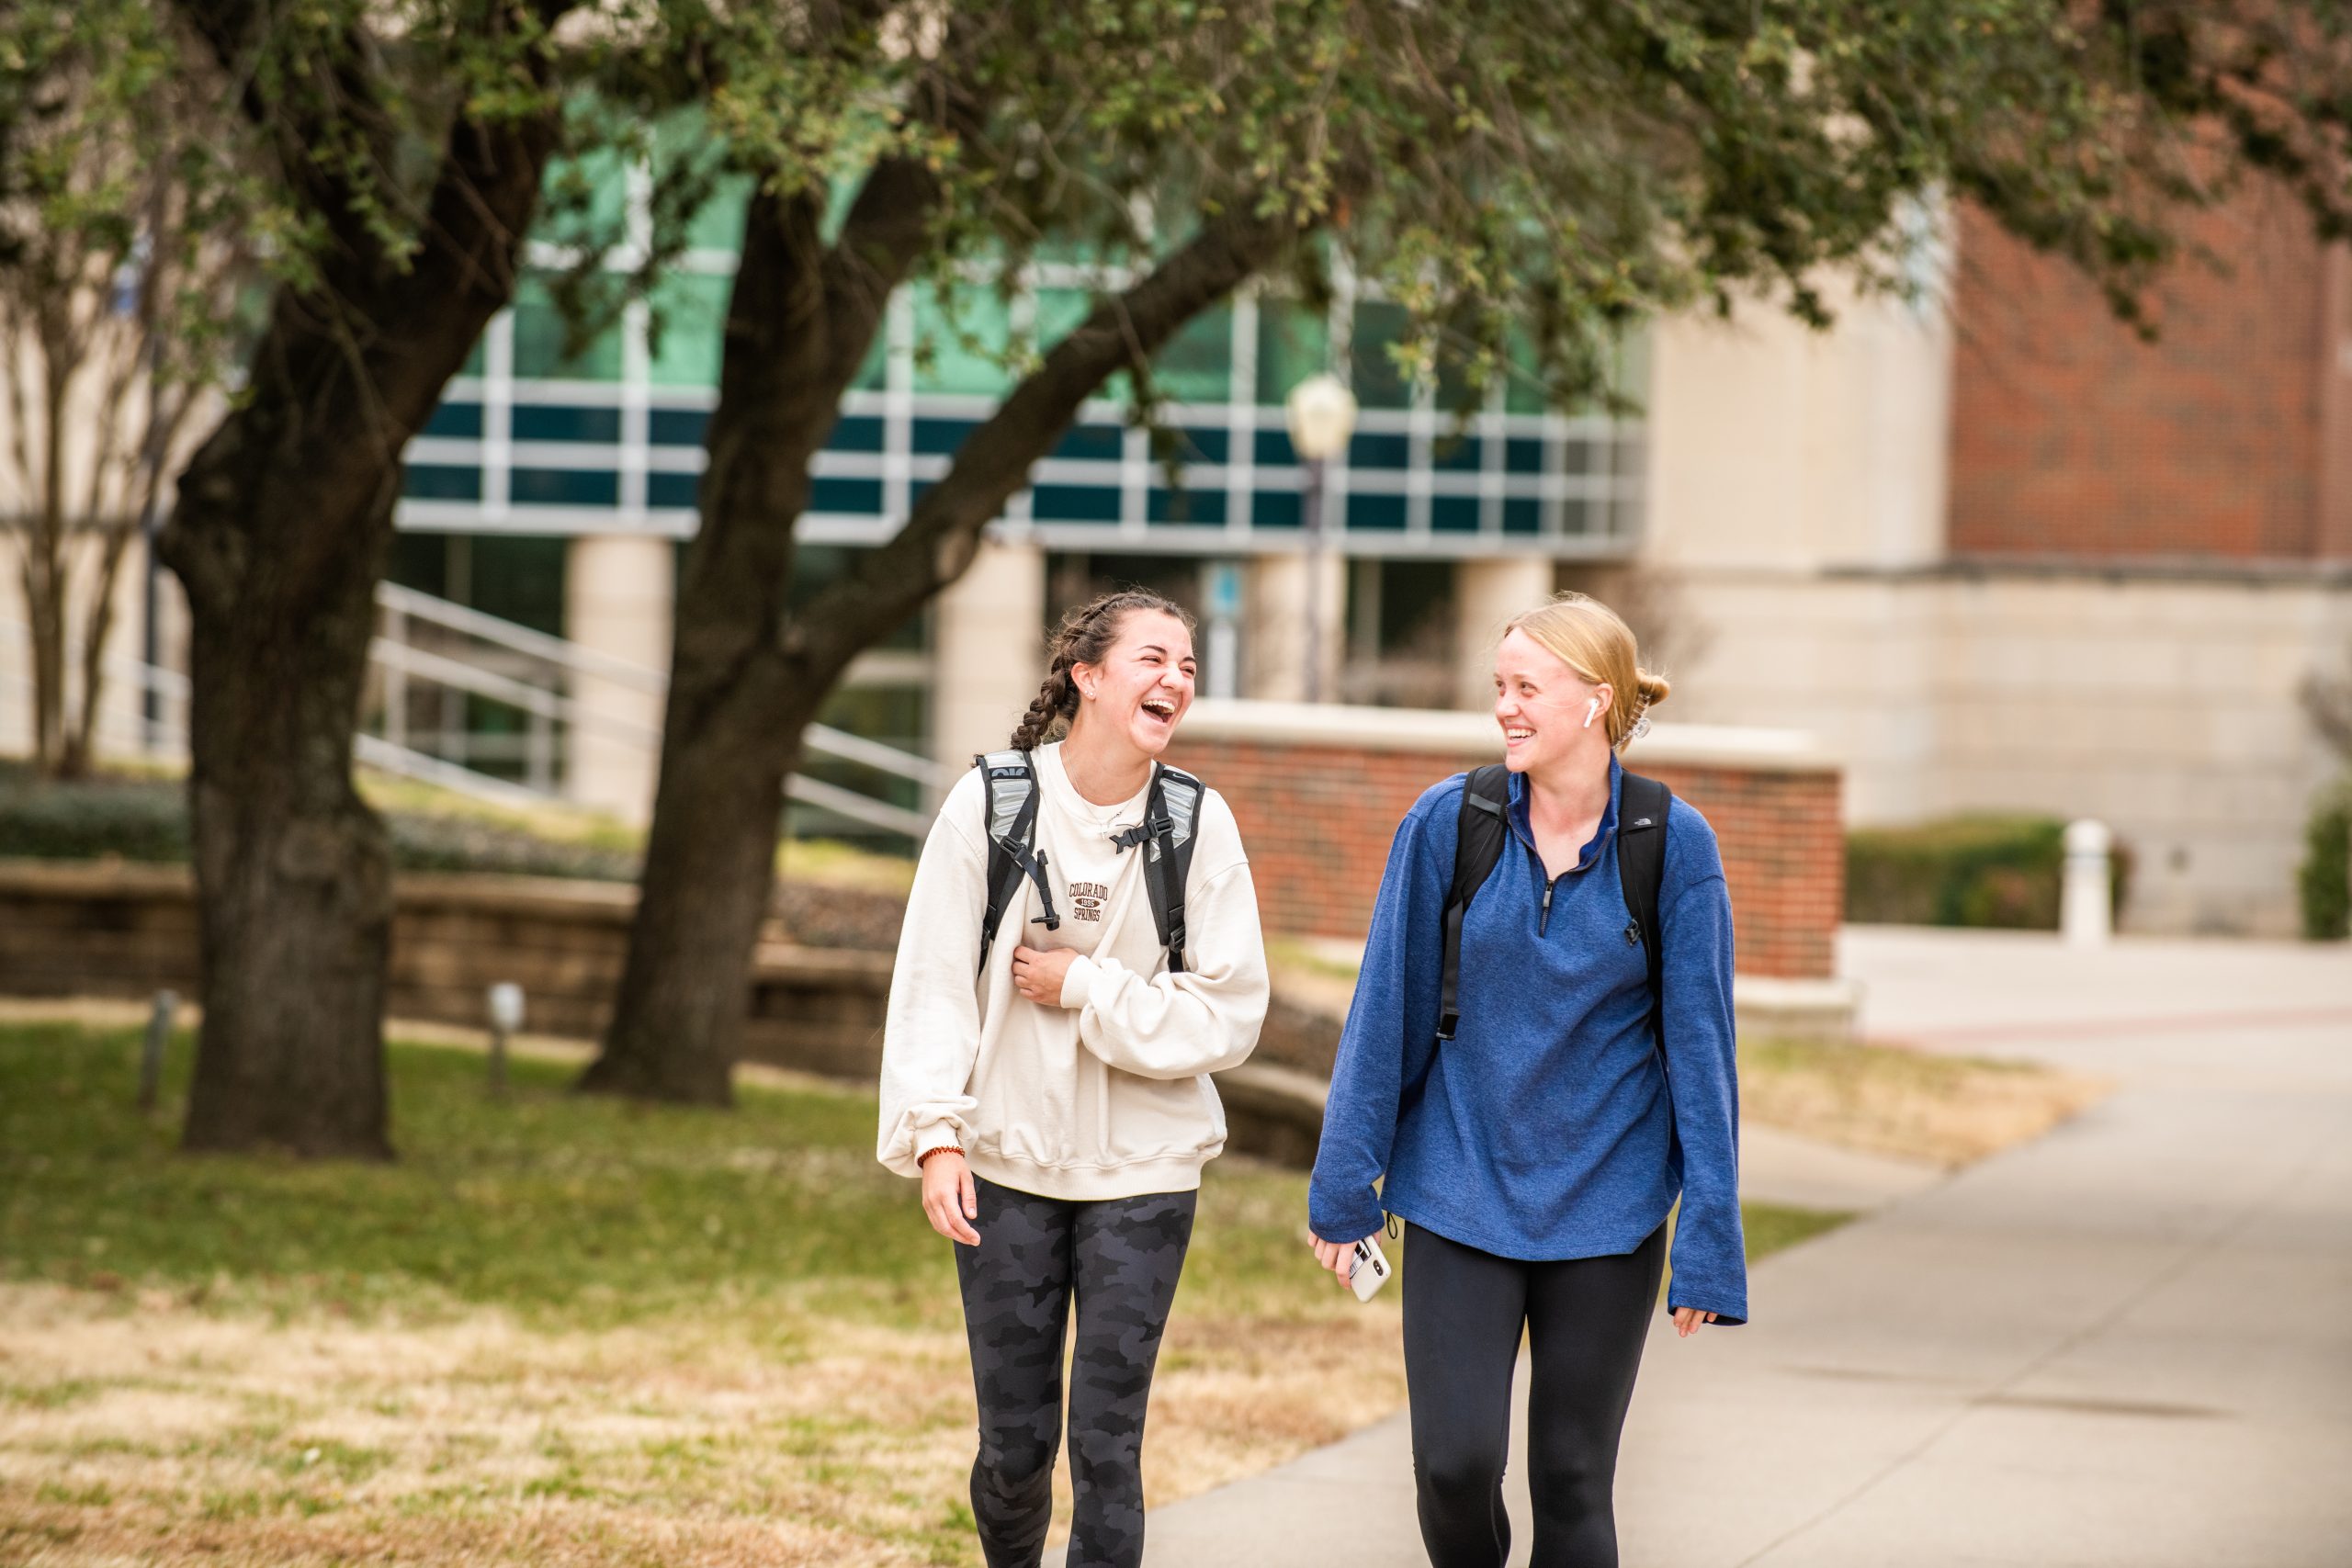 Two female students walking and speaking outside.